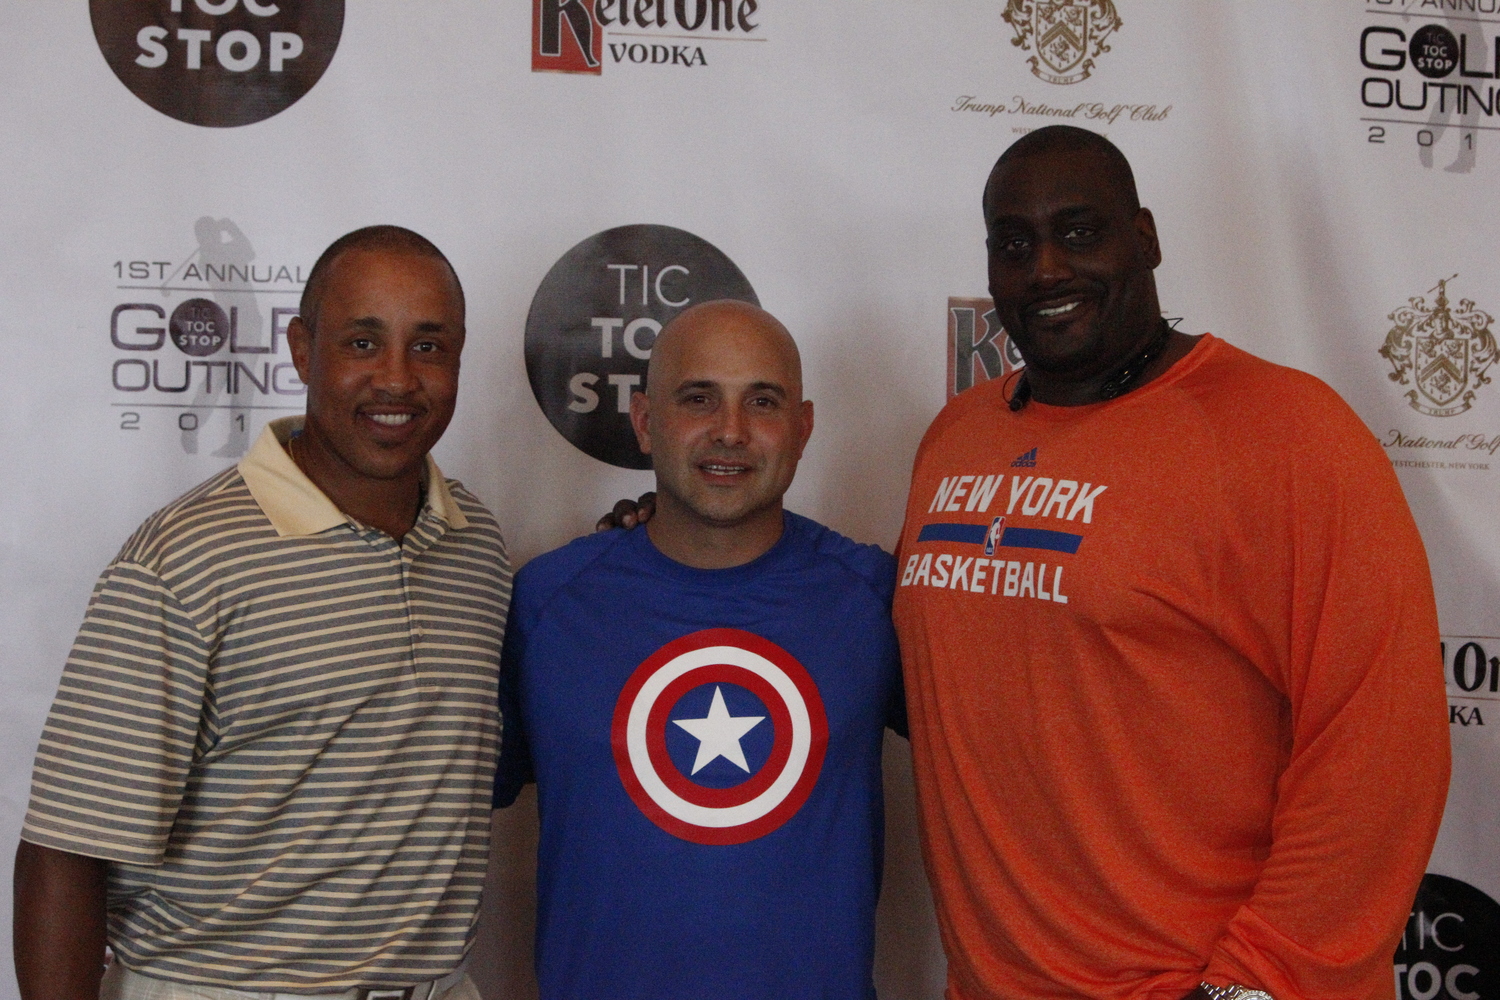 Craig Carton with John Starks and Anthony Mason at the Tic Toc Stop Golf Outing on June 10, 2014. (Photo by Jeffrey Auger/jeffreyauger.com/tictocstop)